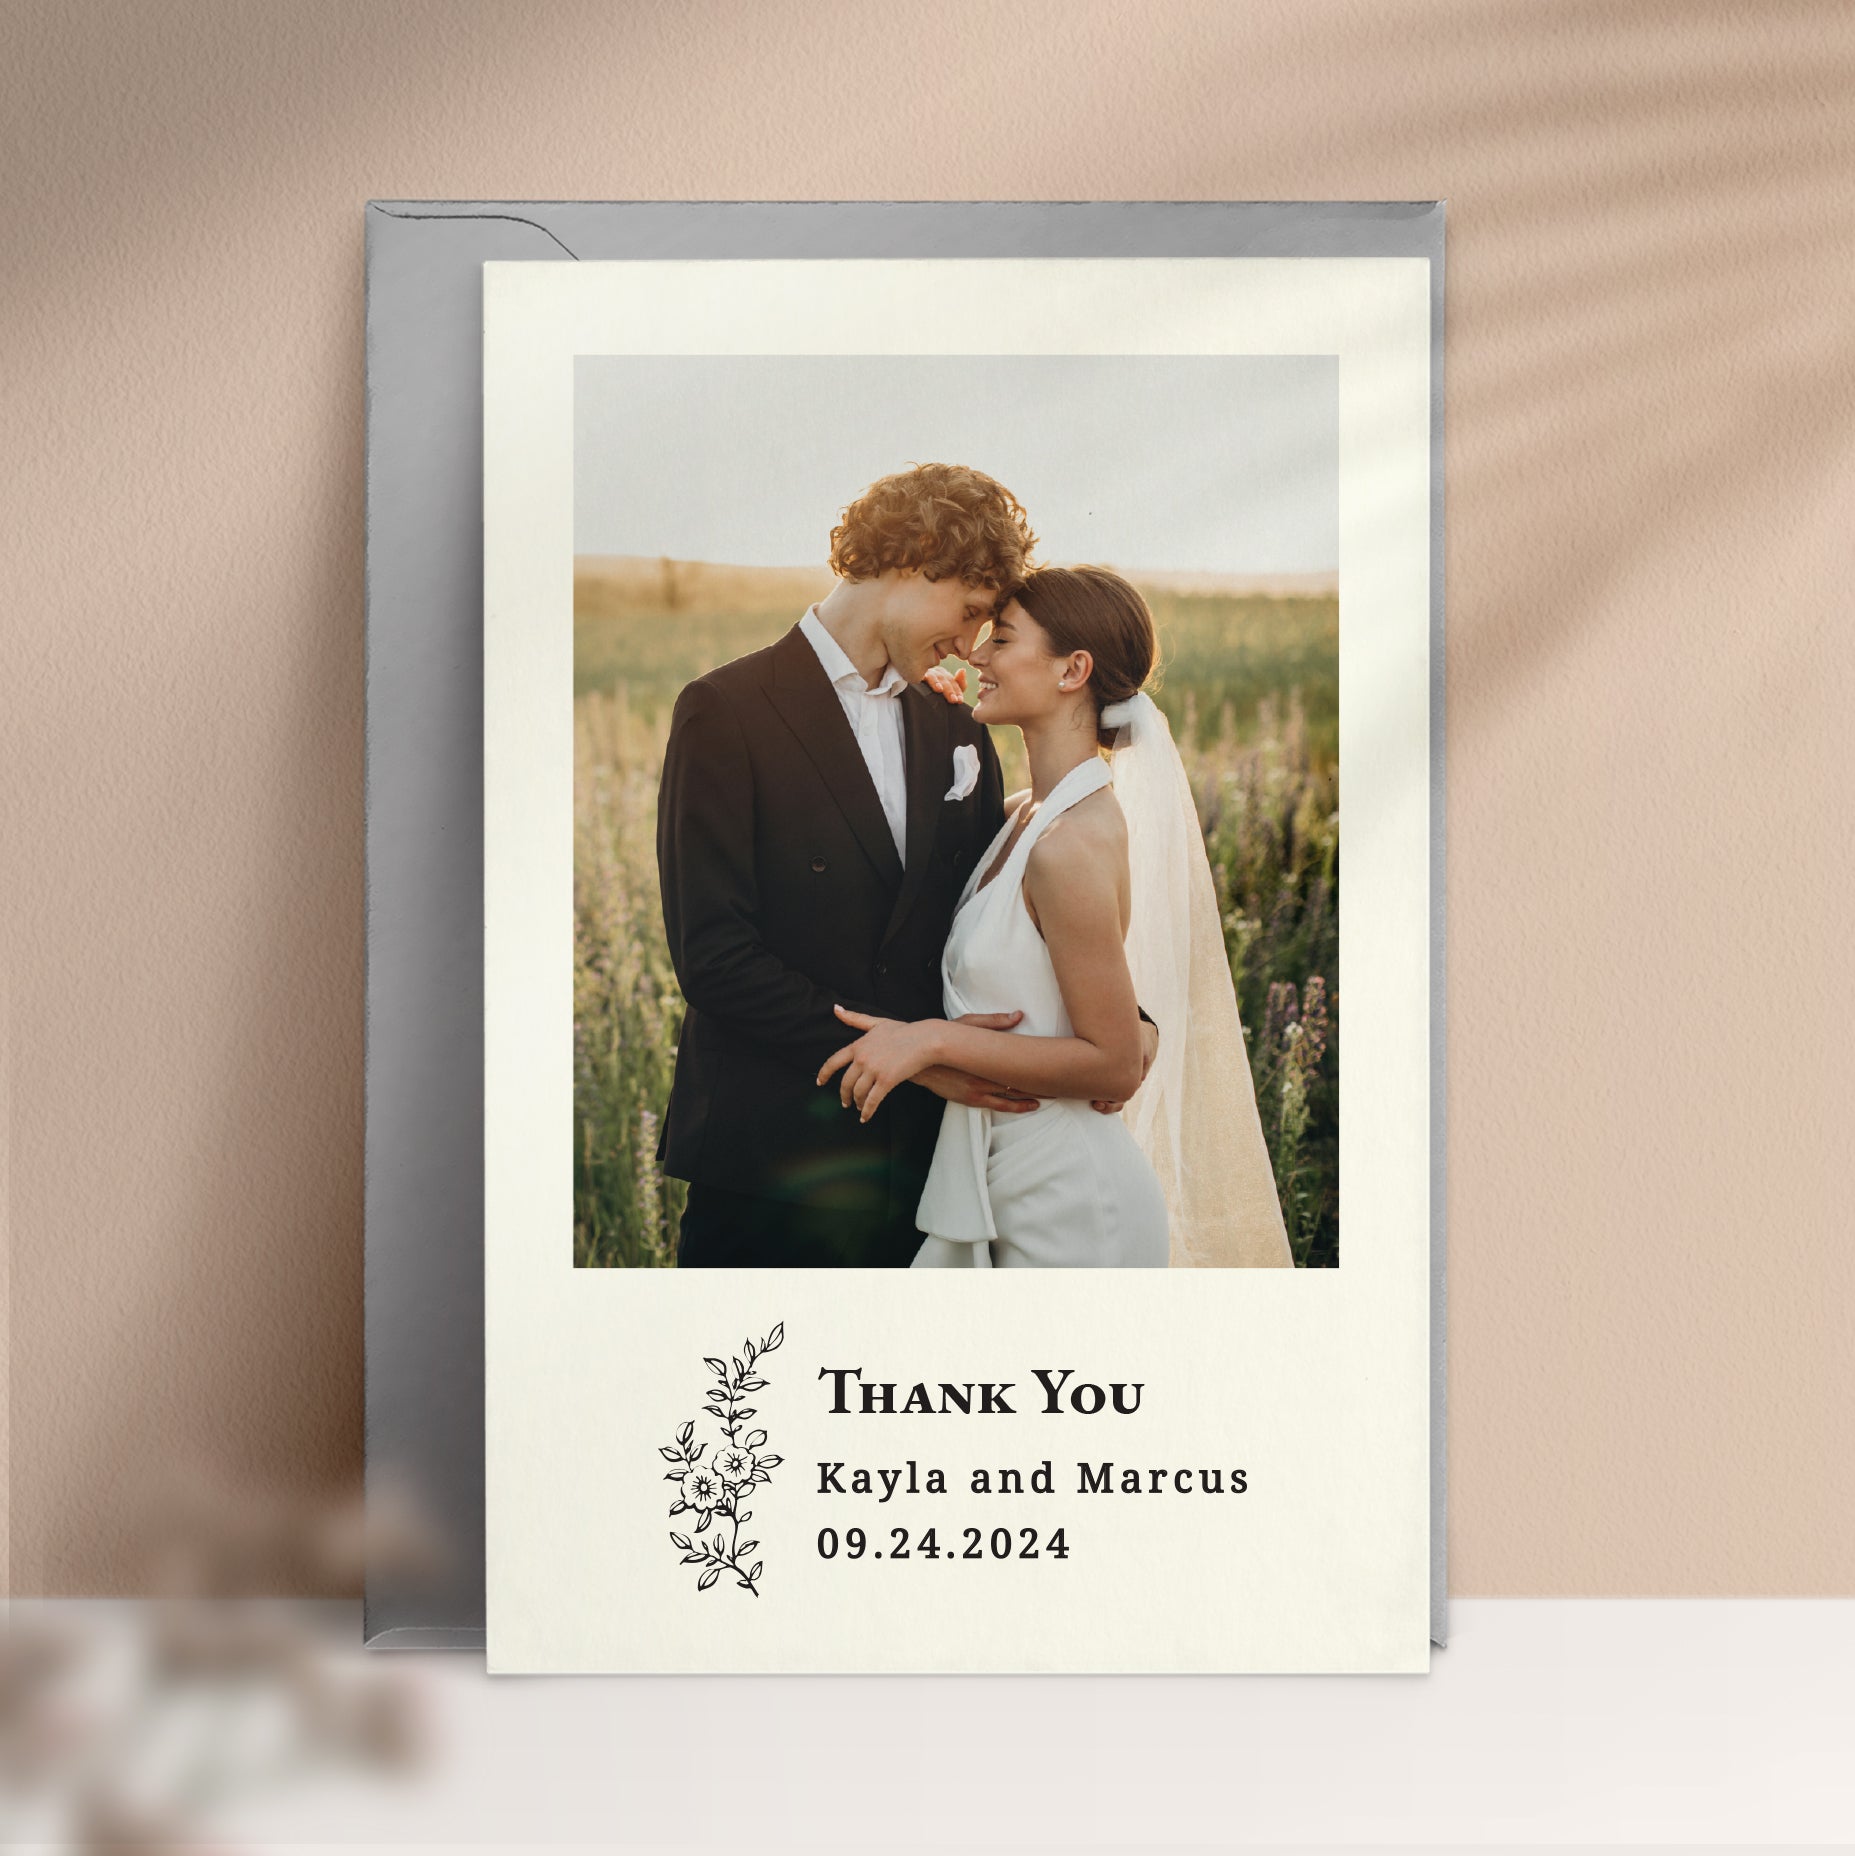 wedding thank you cards with custom photo, names, wedding date and flower branch - XOXOKristen